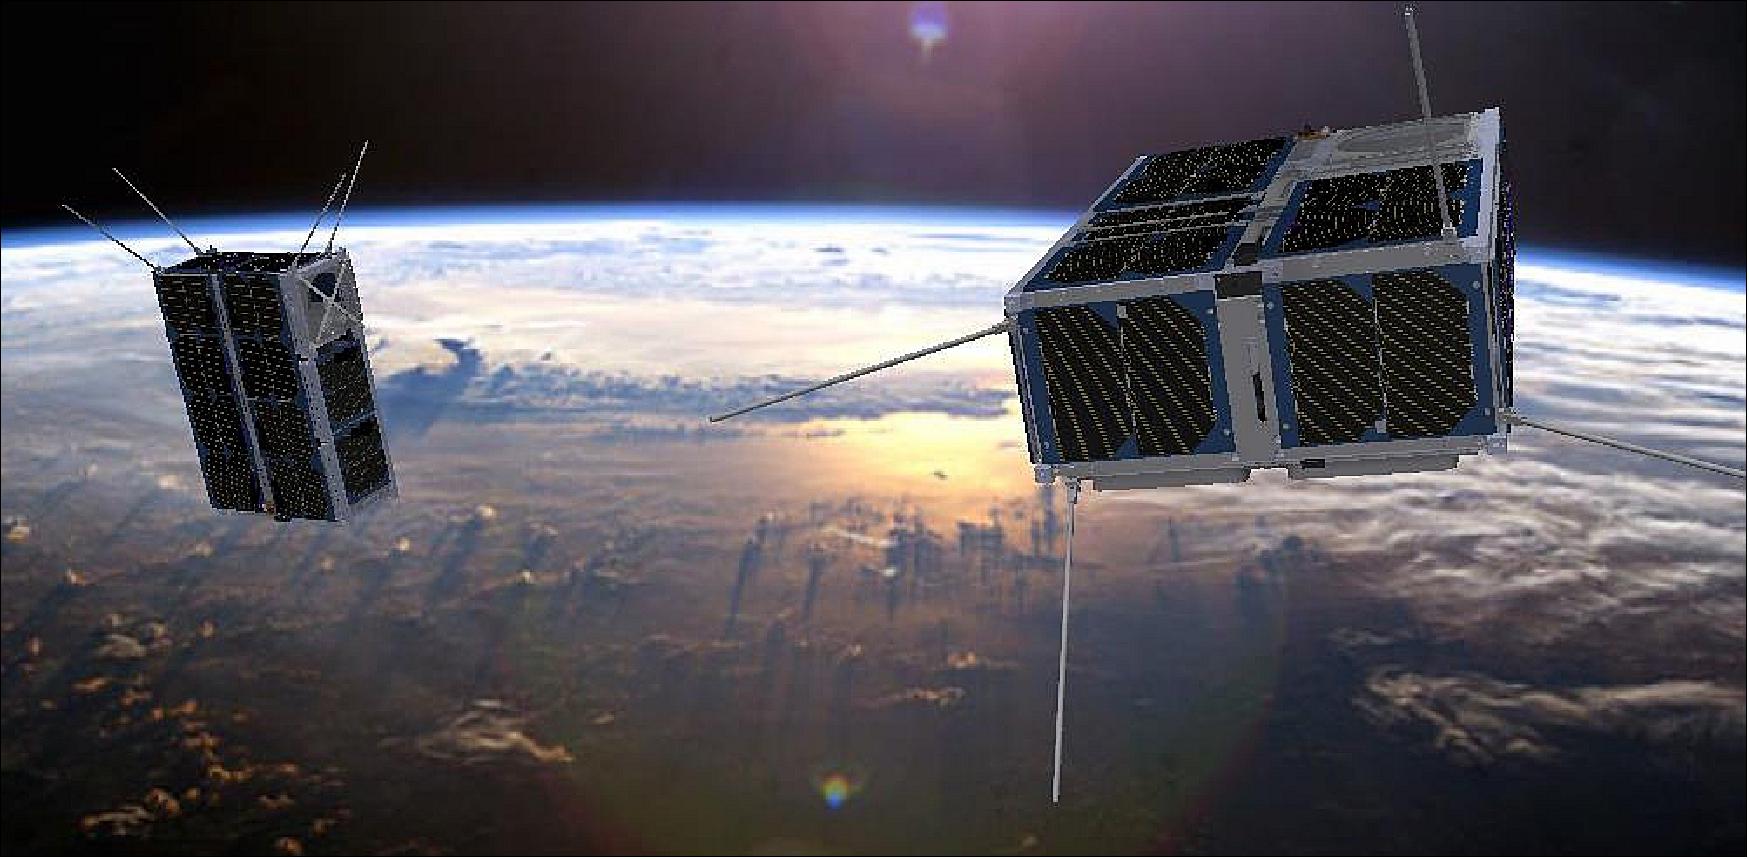 Figure 9: FSSCat is a constellation of two 6U CubeSats that provide data on Earth’s ice and soil moisture content to complement the Sentinel fleet. FSSCat took the top prize at the 2017 Copernicus Masters Competition (image credit: UPC)